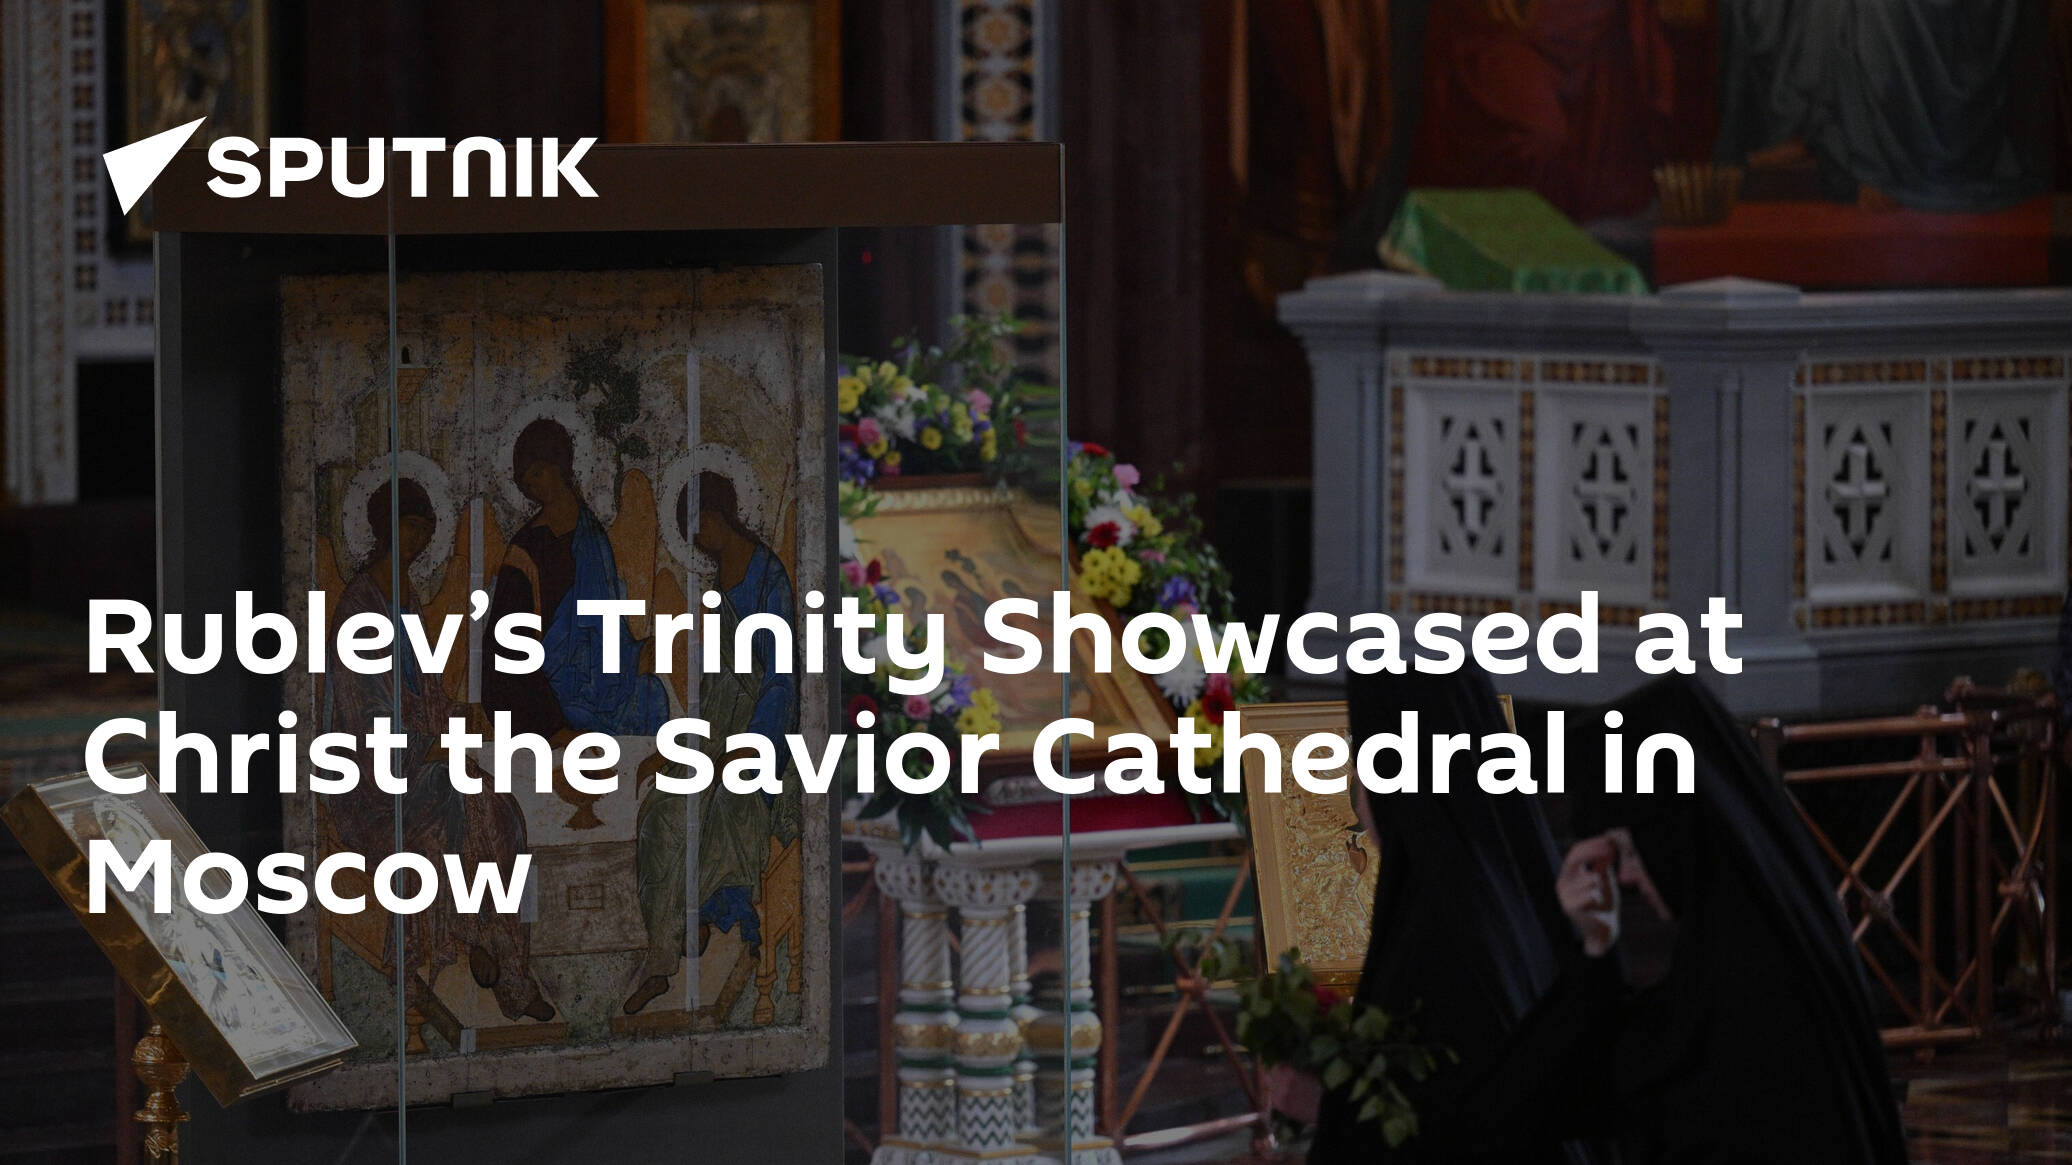 Rublev’s Trinity Showcased at Christ the Savior Cathedral in Moscow